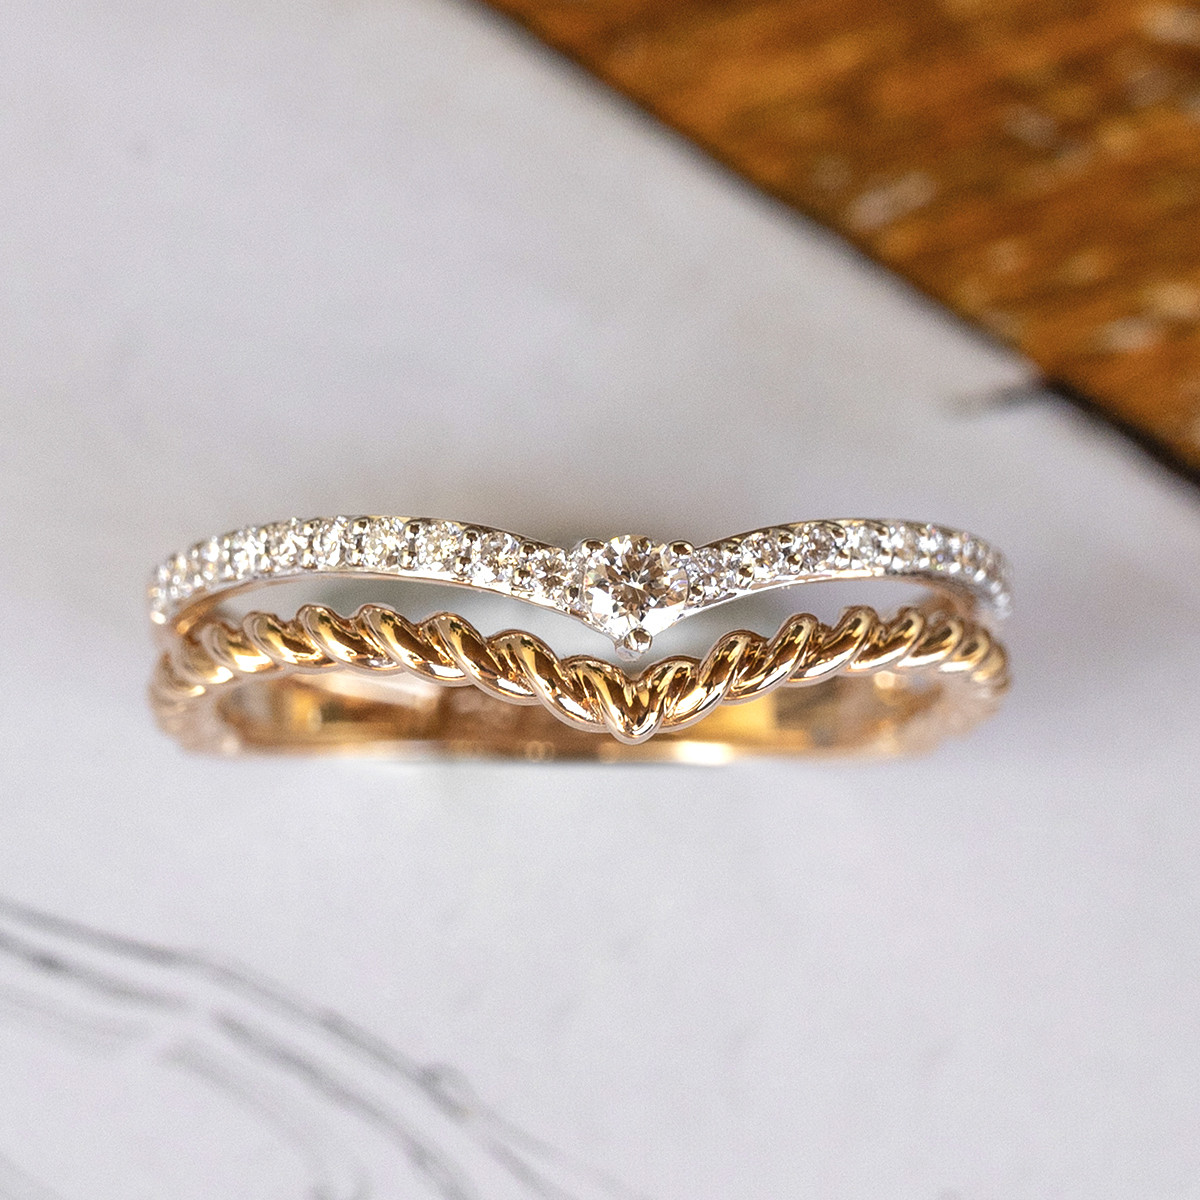 DOUBLE POINTED RING IN ROSE GOLD WITH DIAMONDS